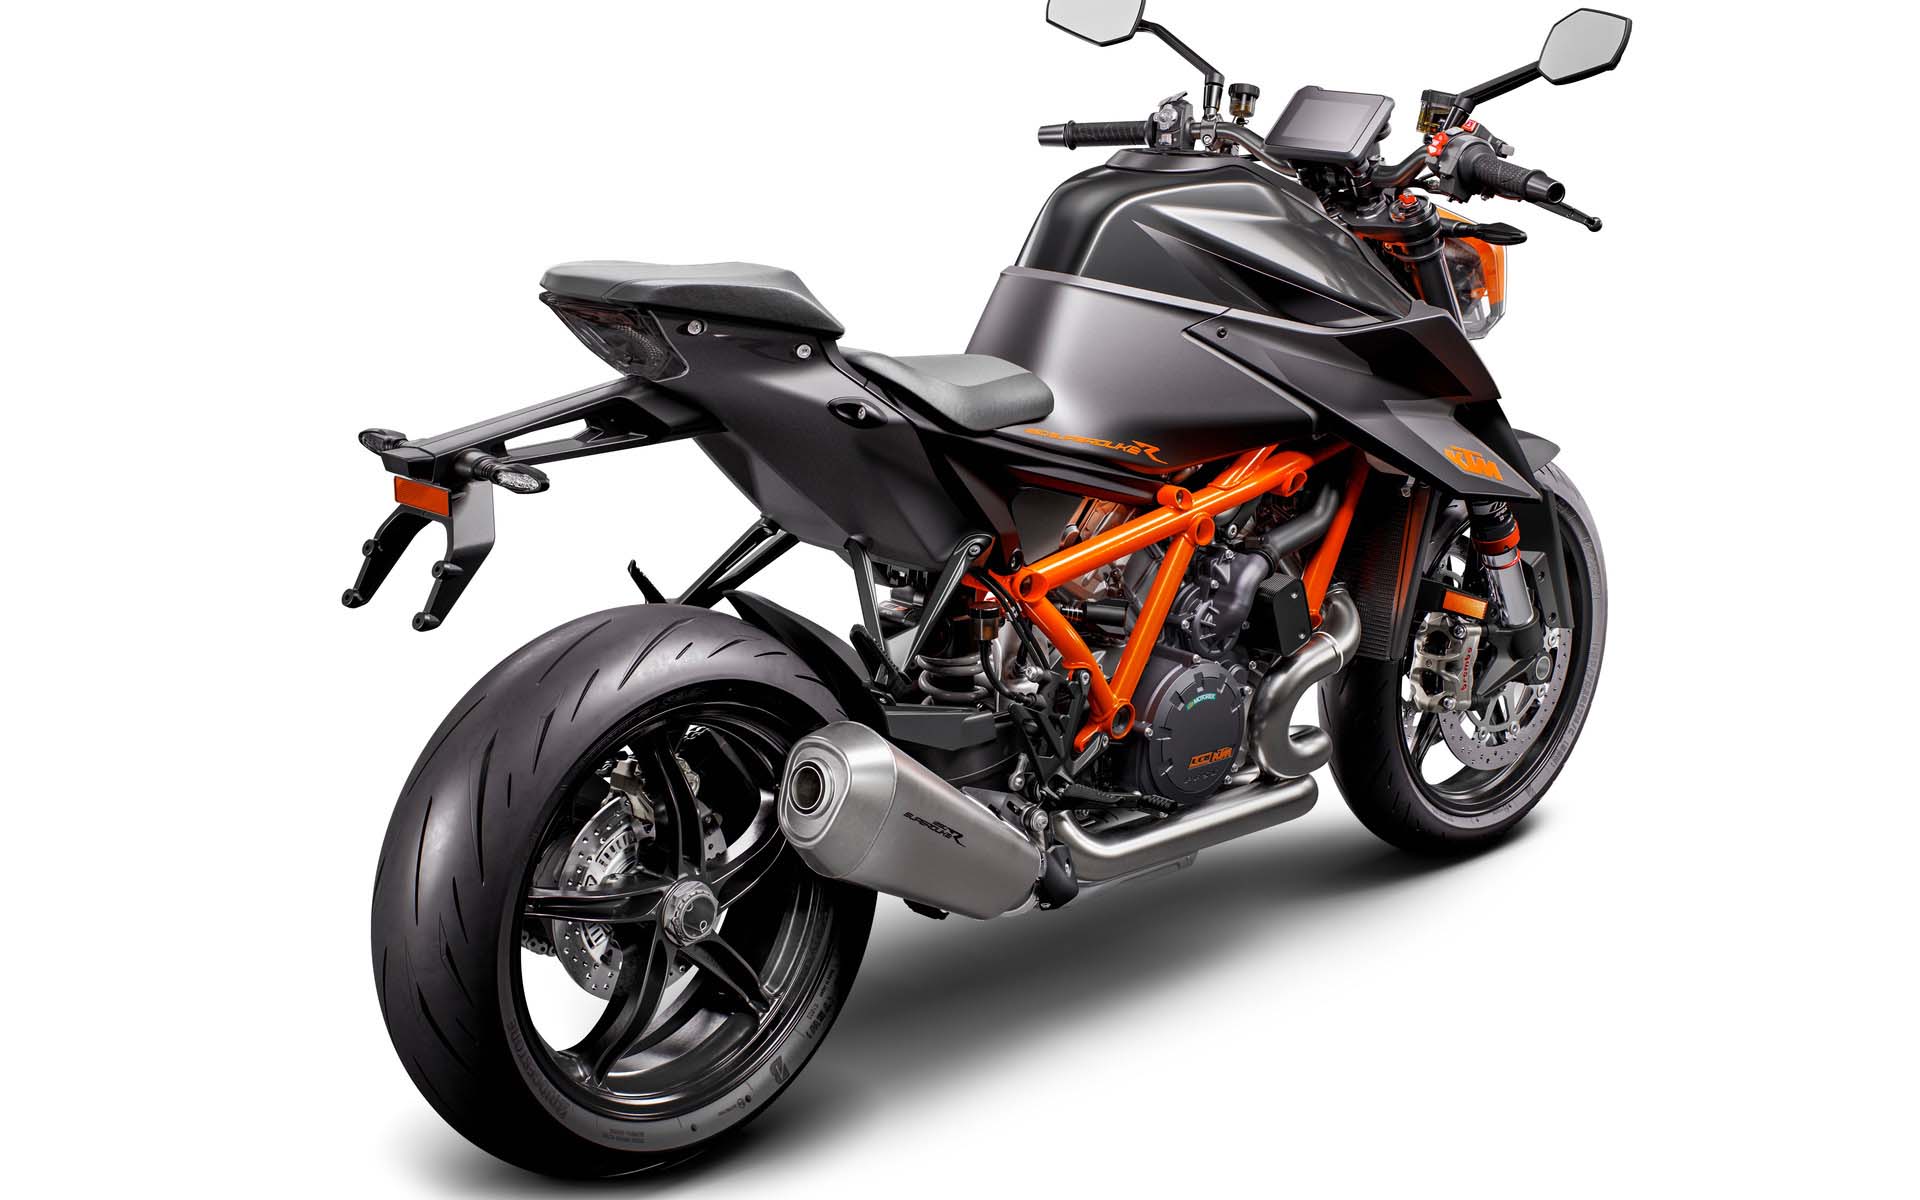 KTM 1290 Super Duke R Not Coming to India Anytime Soon - background